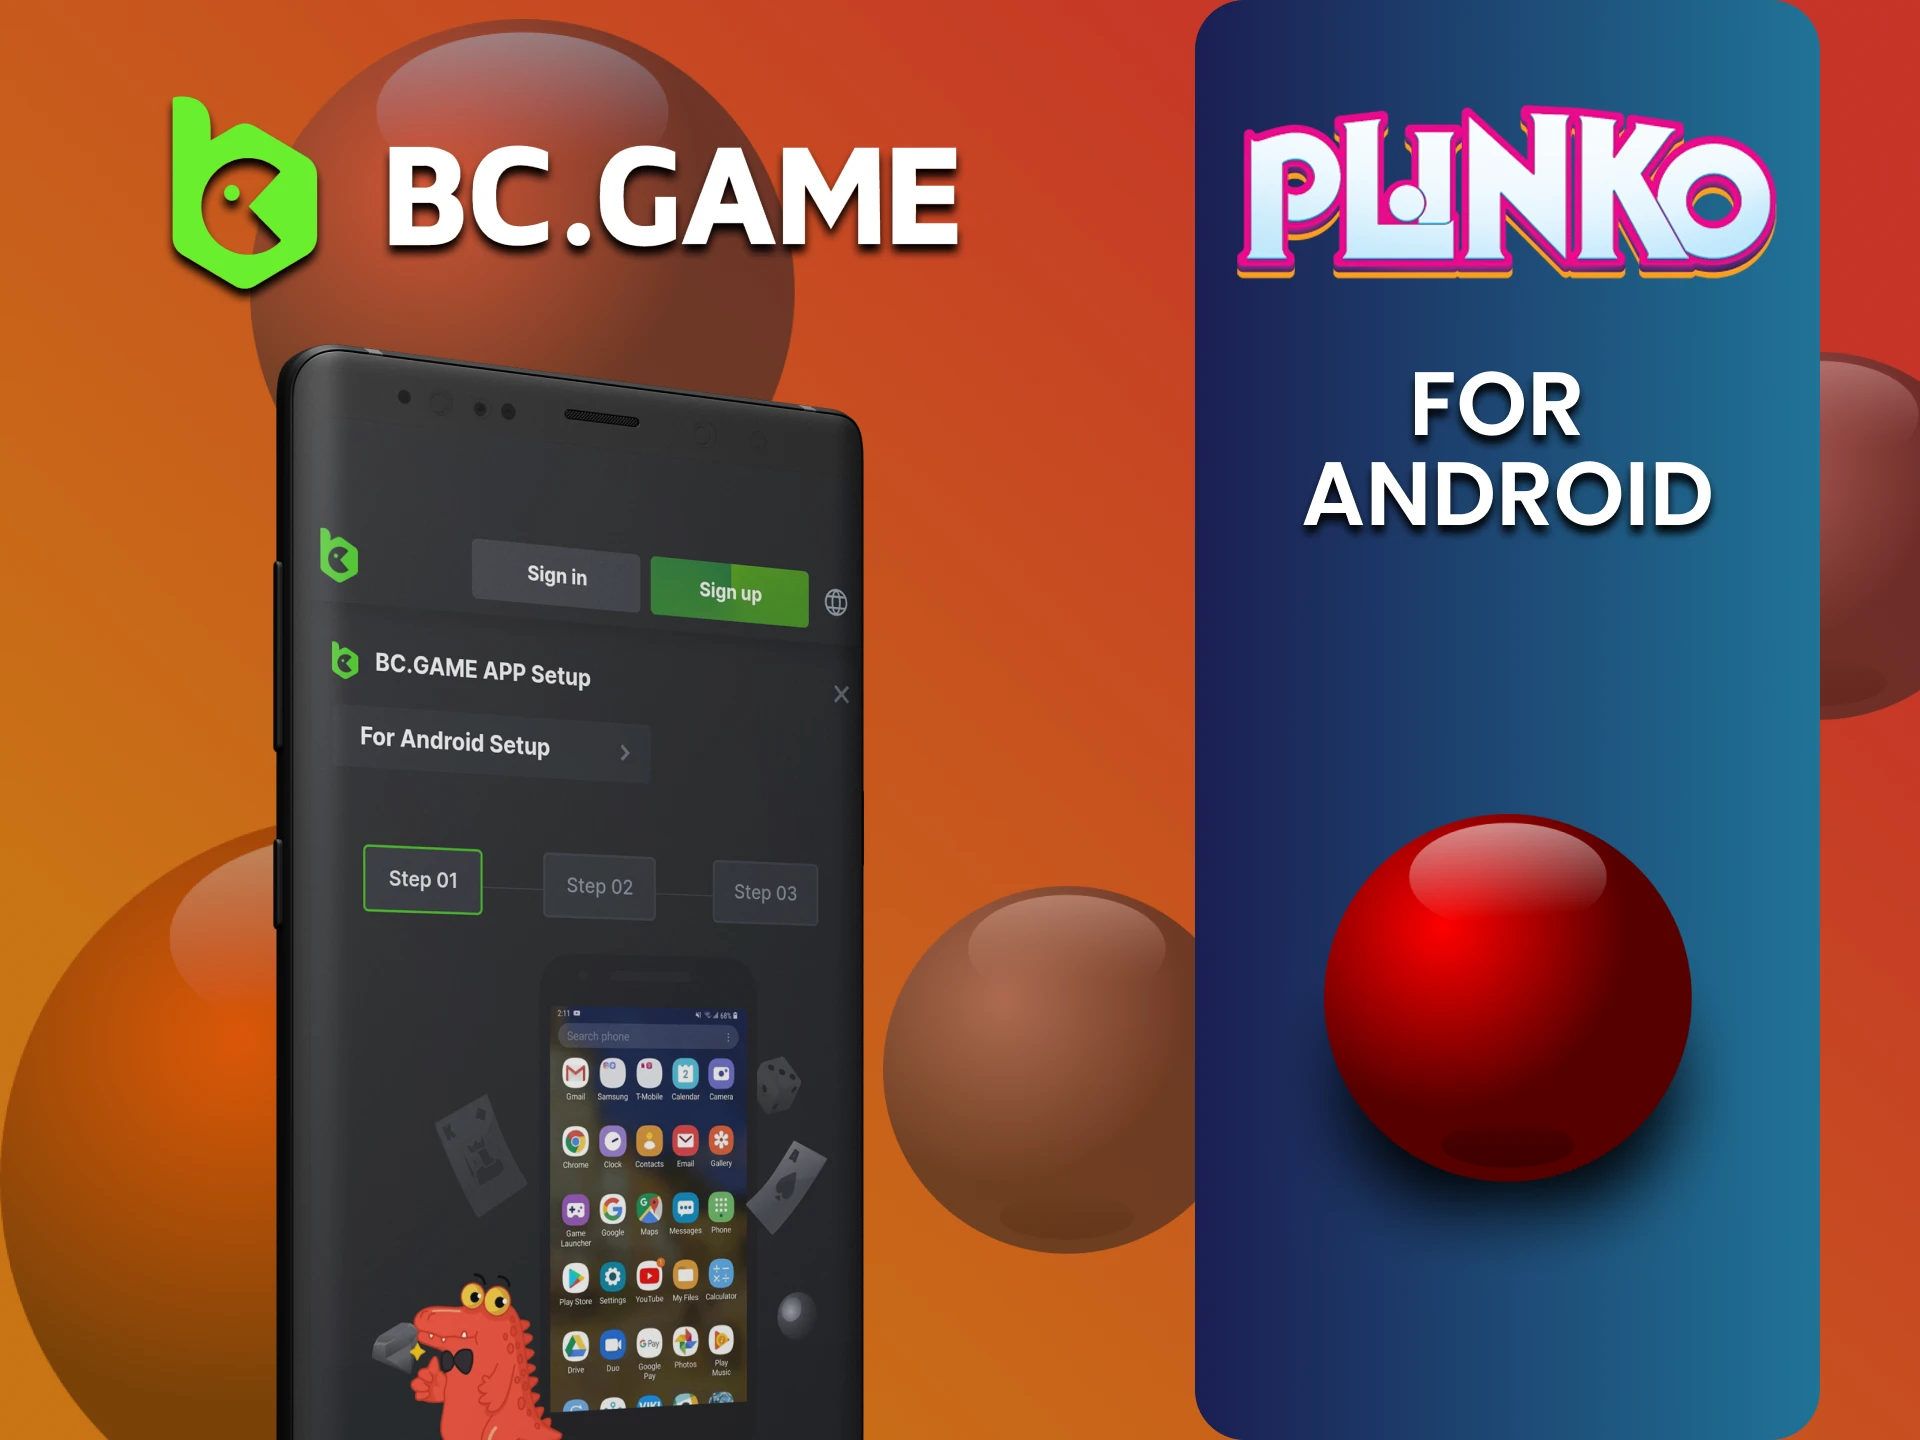 Download the BCGame app to play Plinko on Android.